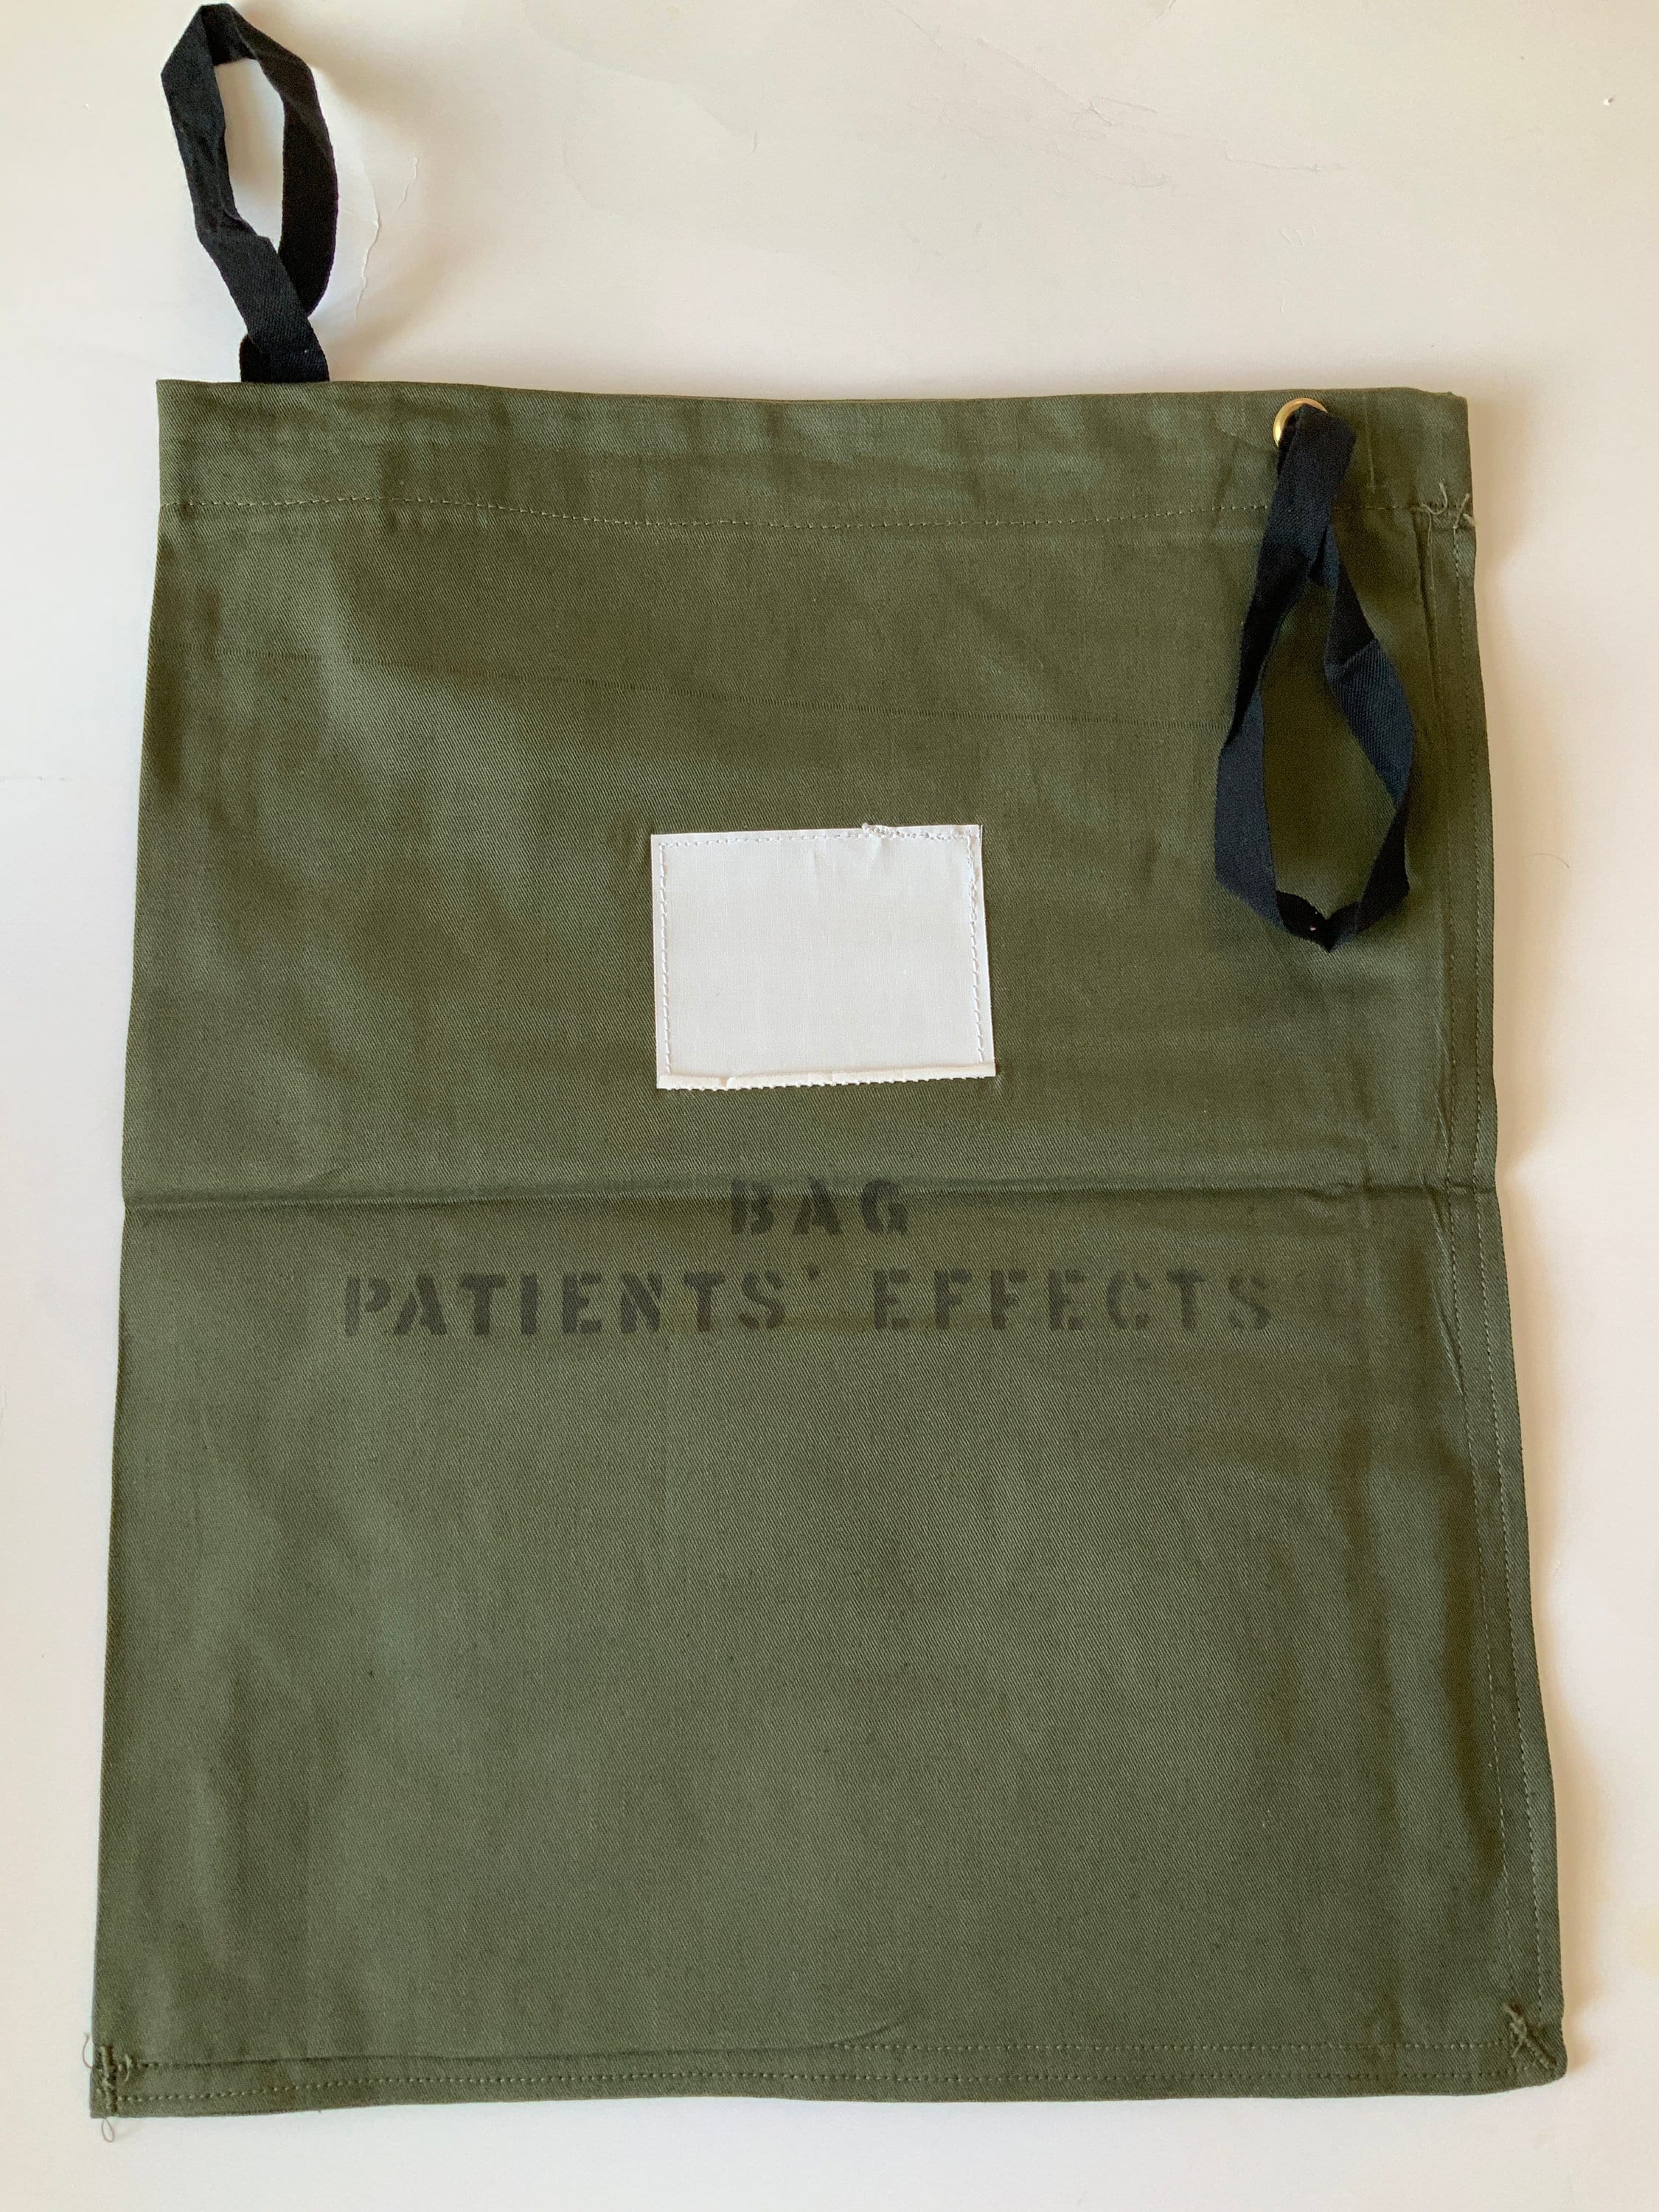 Military tote Bags Patients Effects Bags. 4 Pack. - Etsy